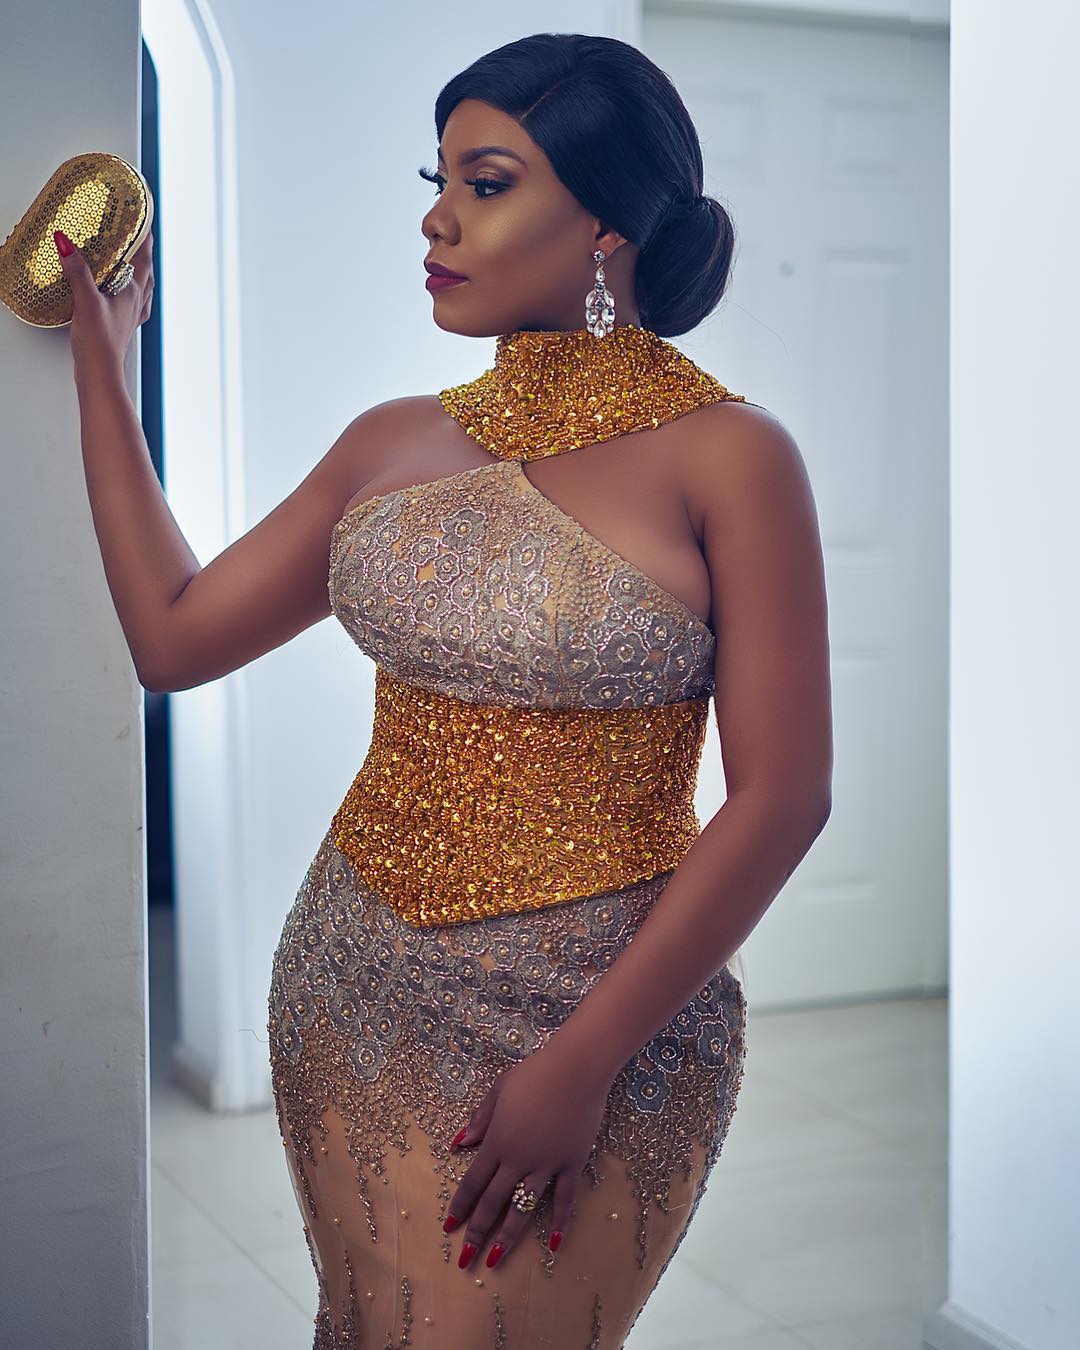 Four August Fashion Shades Of Zynnel Zuh (PHOTOS)